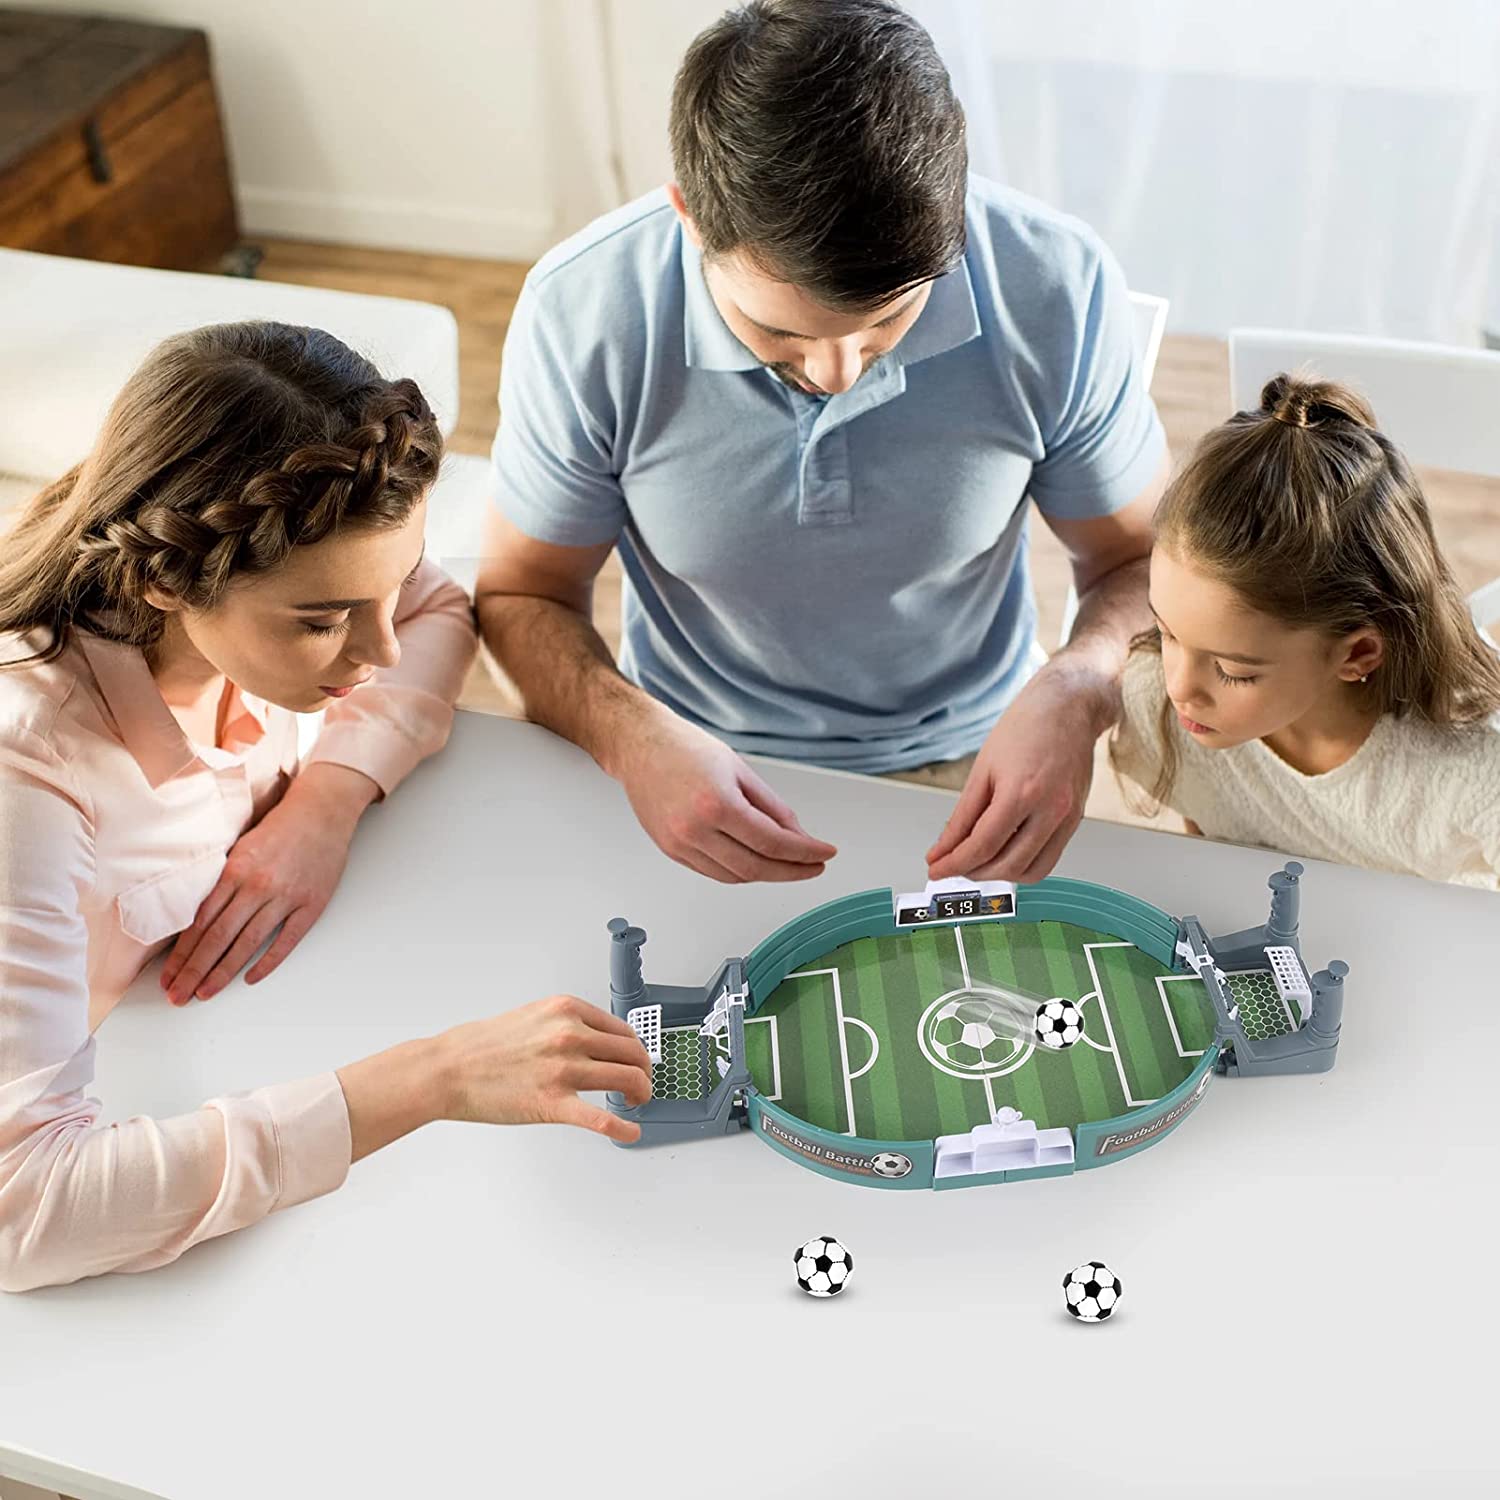 🎁Early Christmas Sale  48% OFF - Football Table Gam🔥🔥BUY 2 FREE SHIPPING